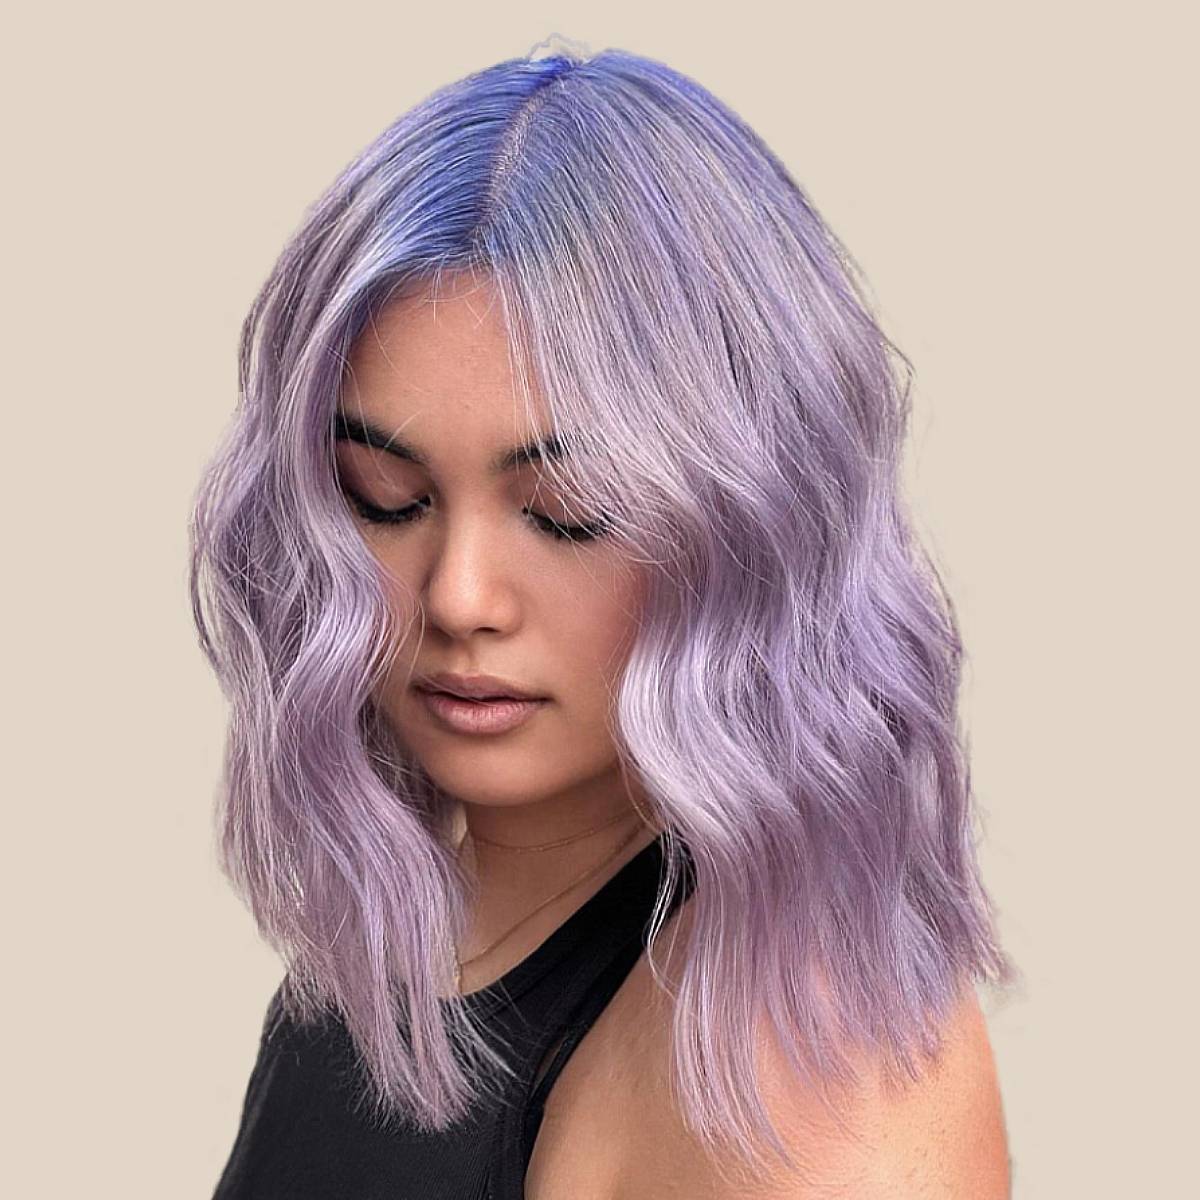 Get the Trendiest Look with Silver Purple Curly Hair - Click Here!